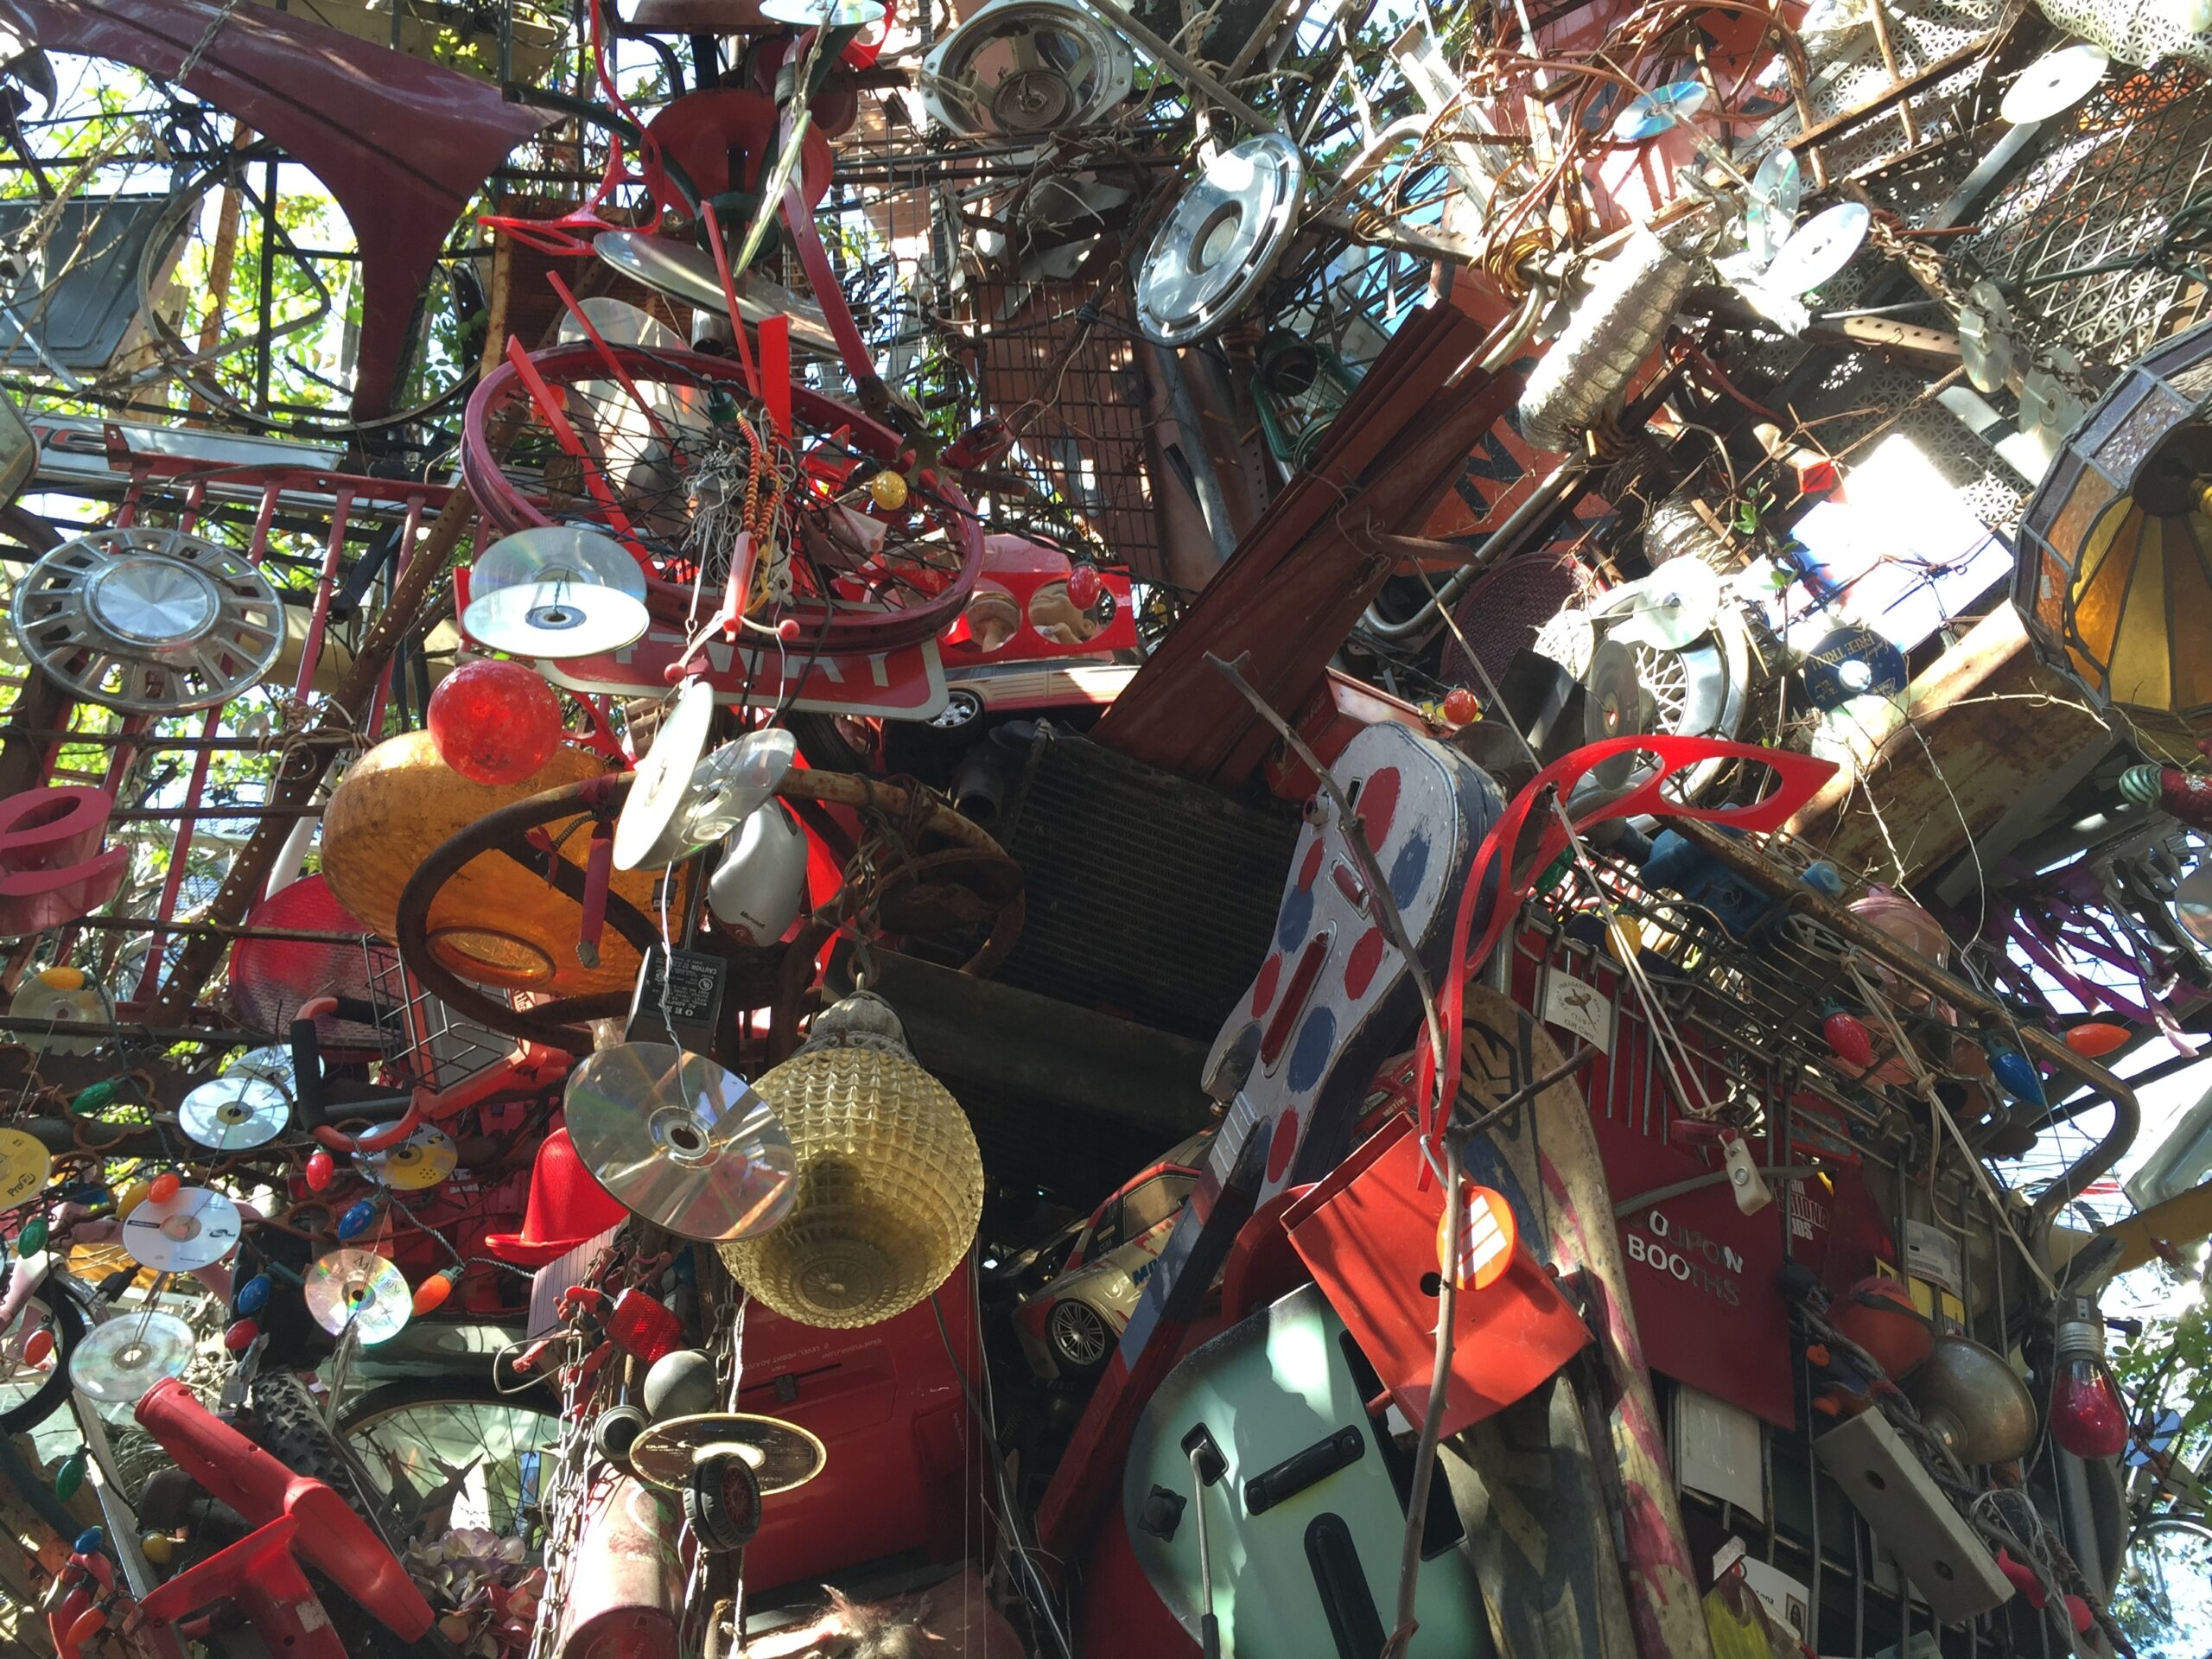 Cathedral of Junk - Just one small area of the cathedral